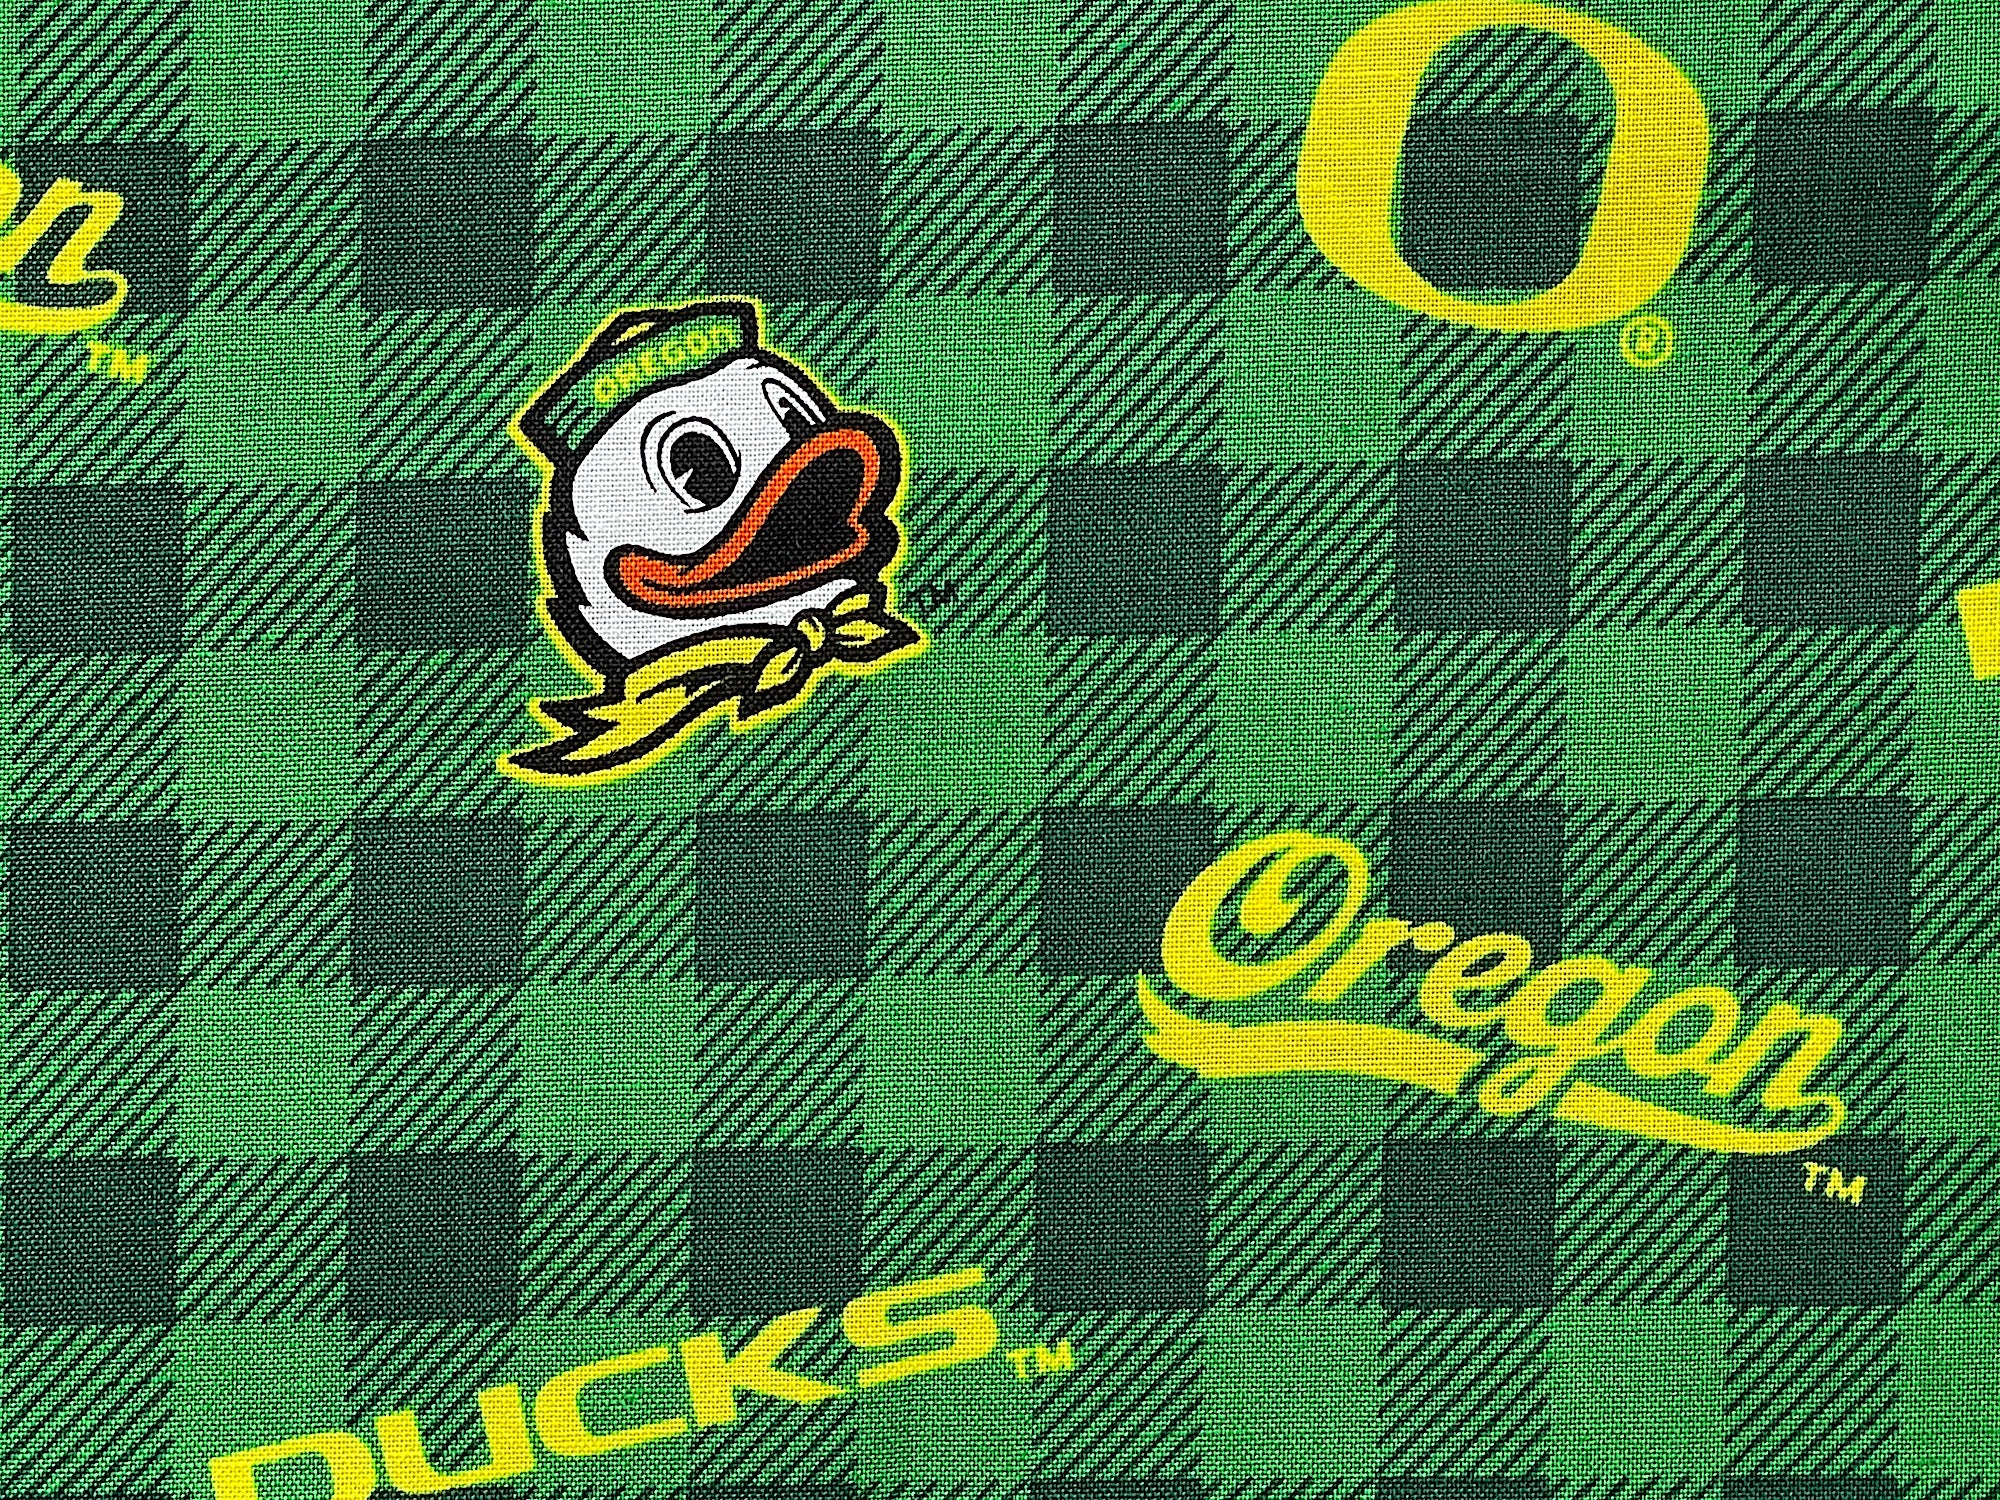 Close up of the word Oregon and an Oregon duck head.